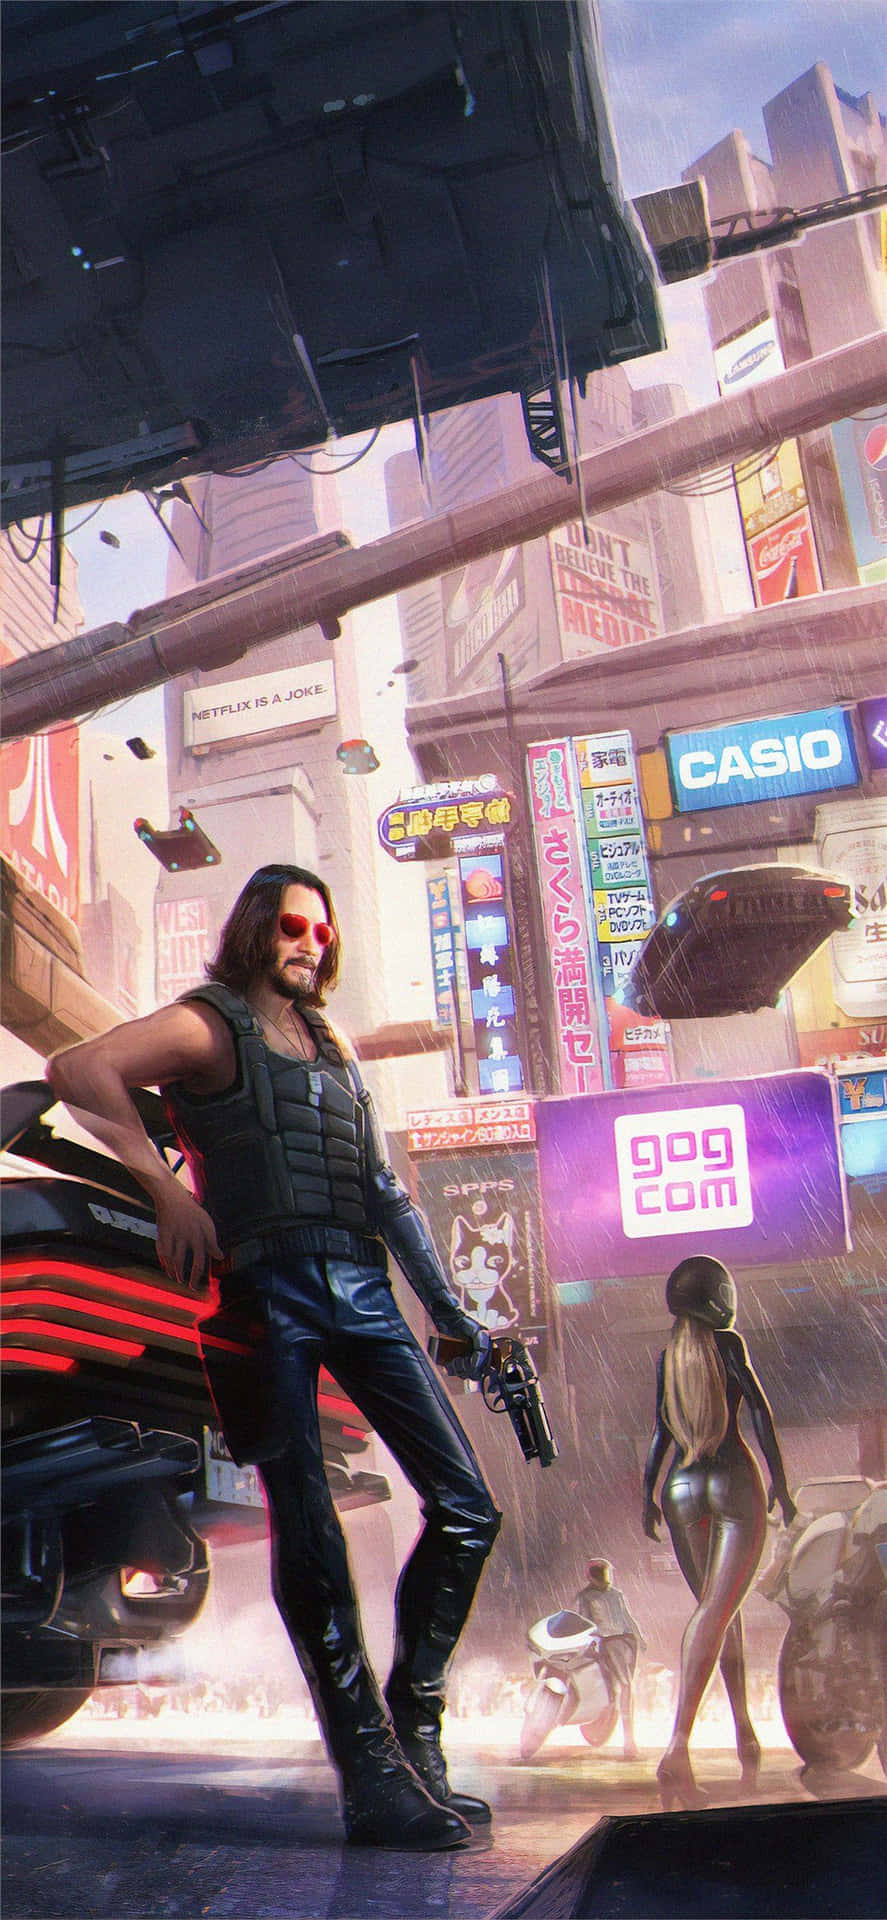 Iphone X Cyberpunk 2077 Background Johnny Silverhand By His Car